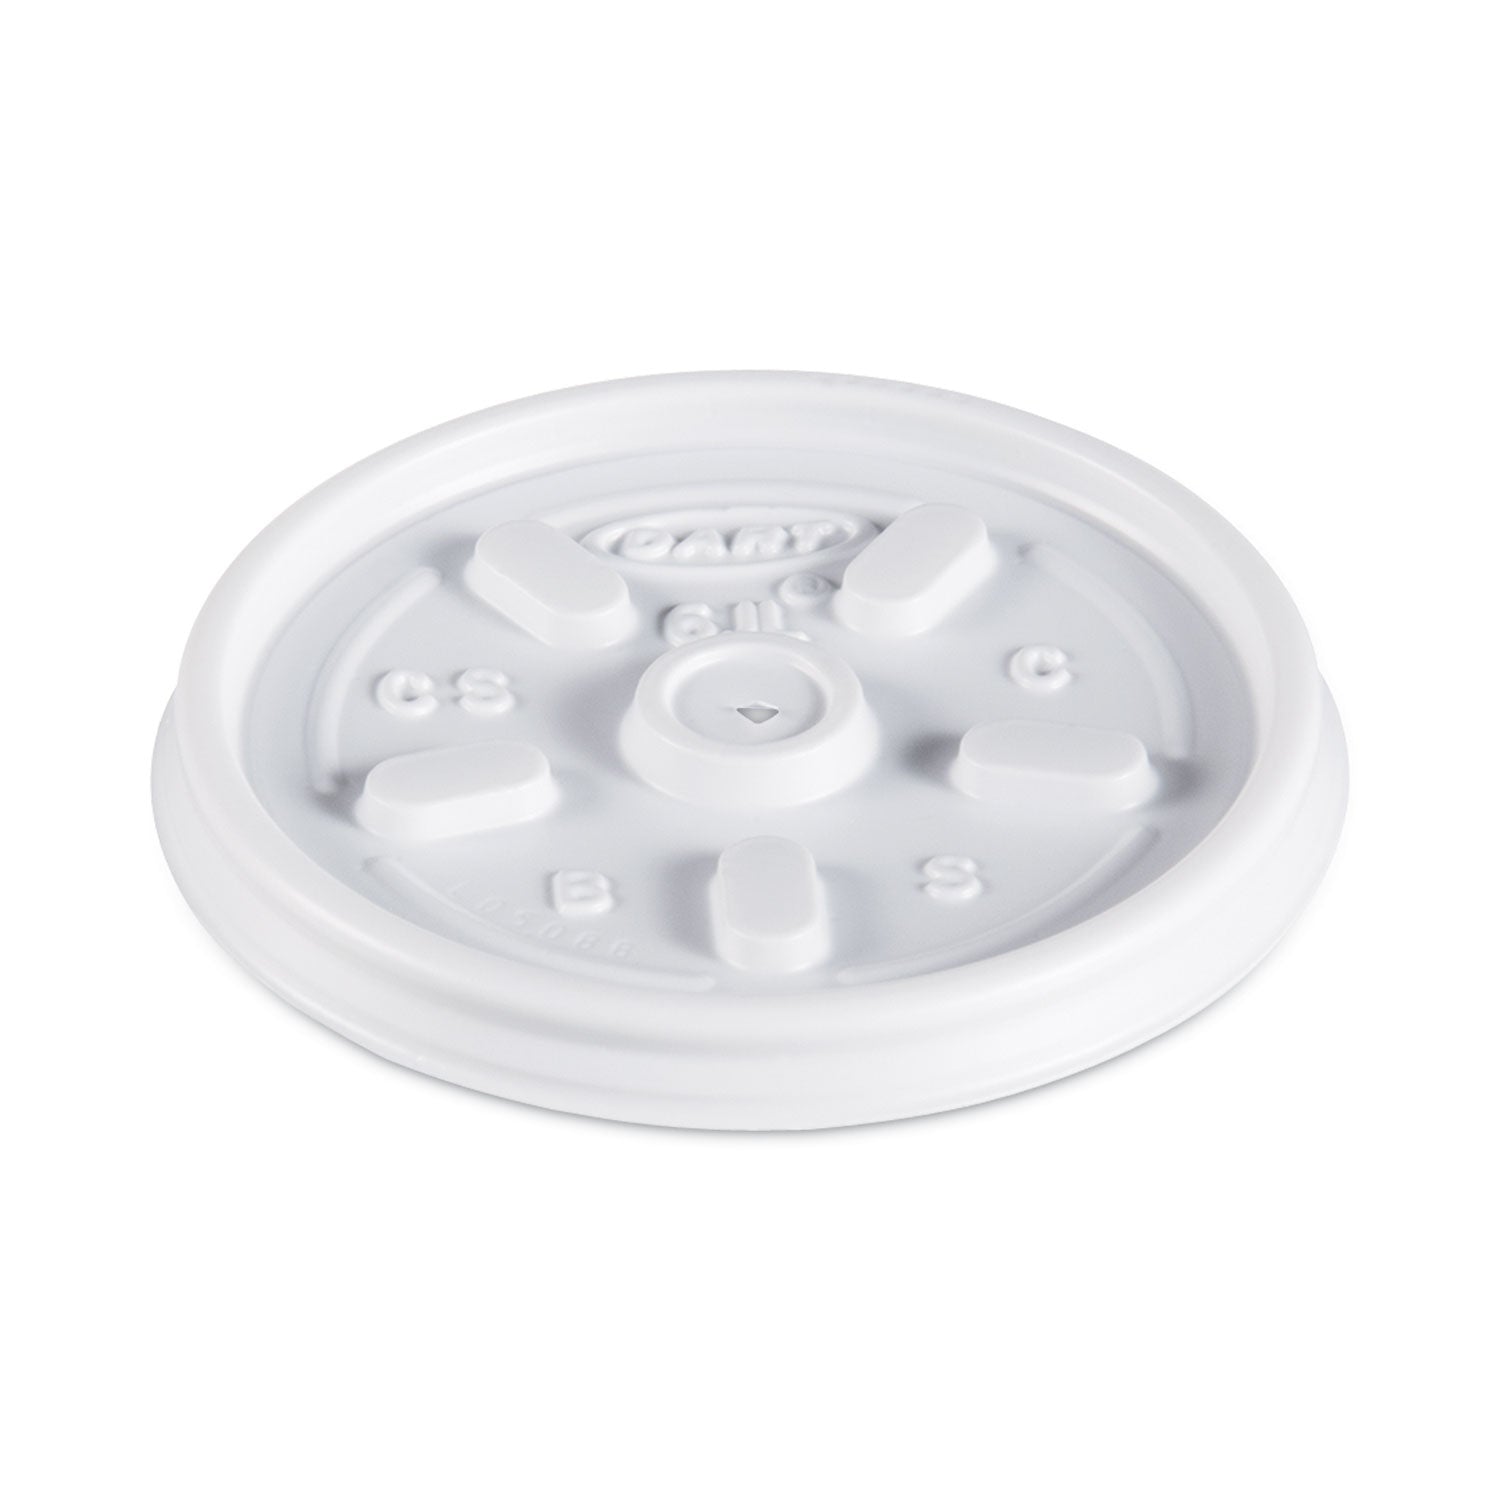 Plastic Lids for Foam Containers, Vented, Fits 3.5-6 oz, White, 100/Pack, 10 Packs/Carton - 